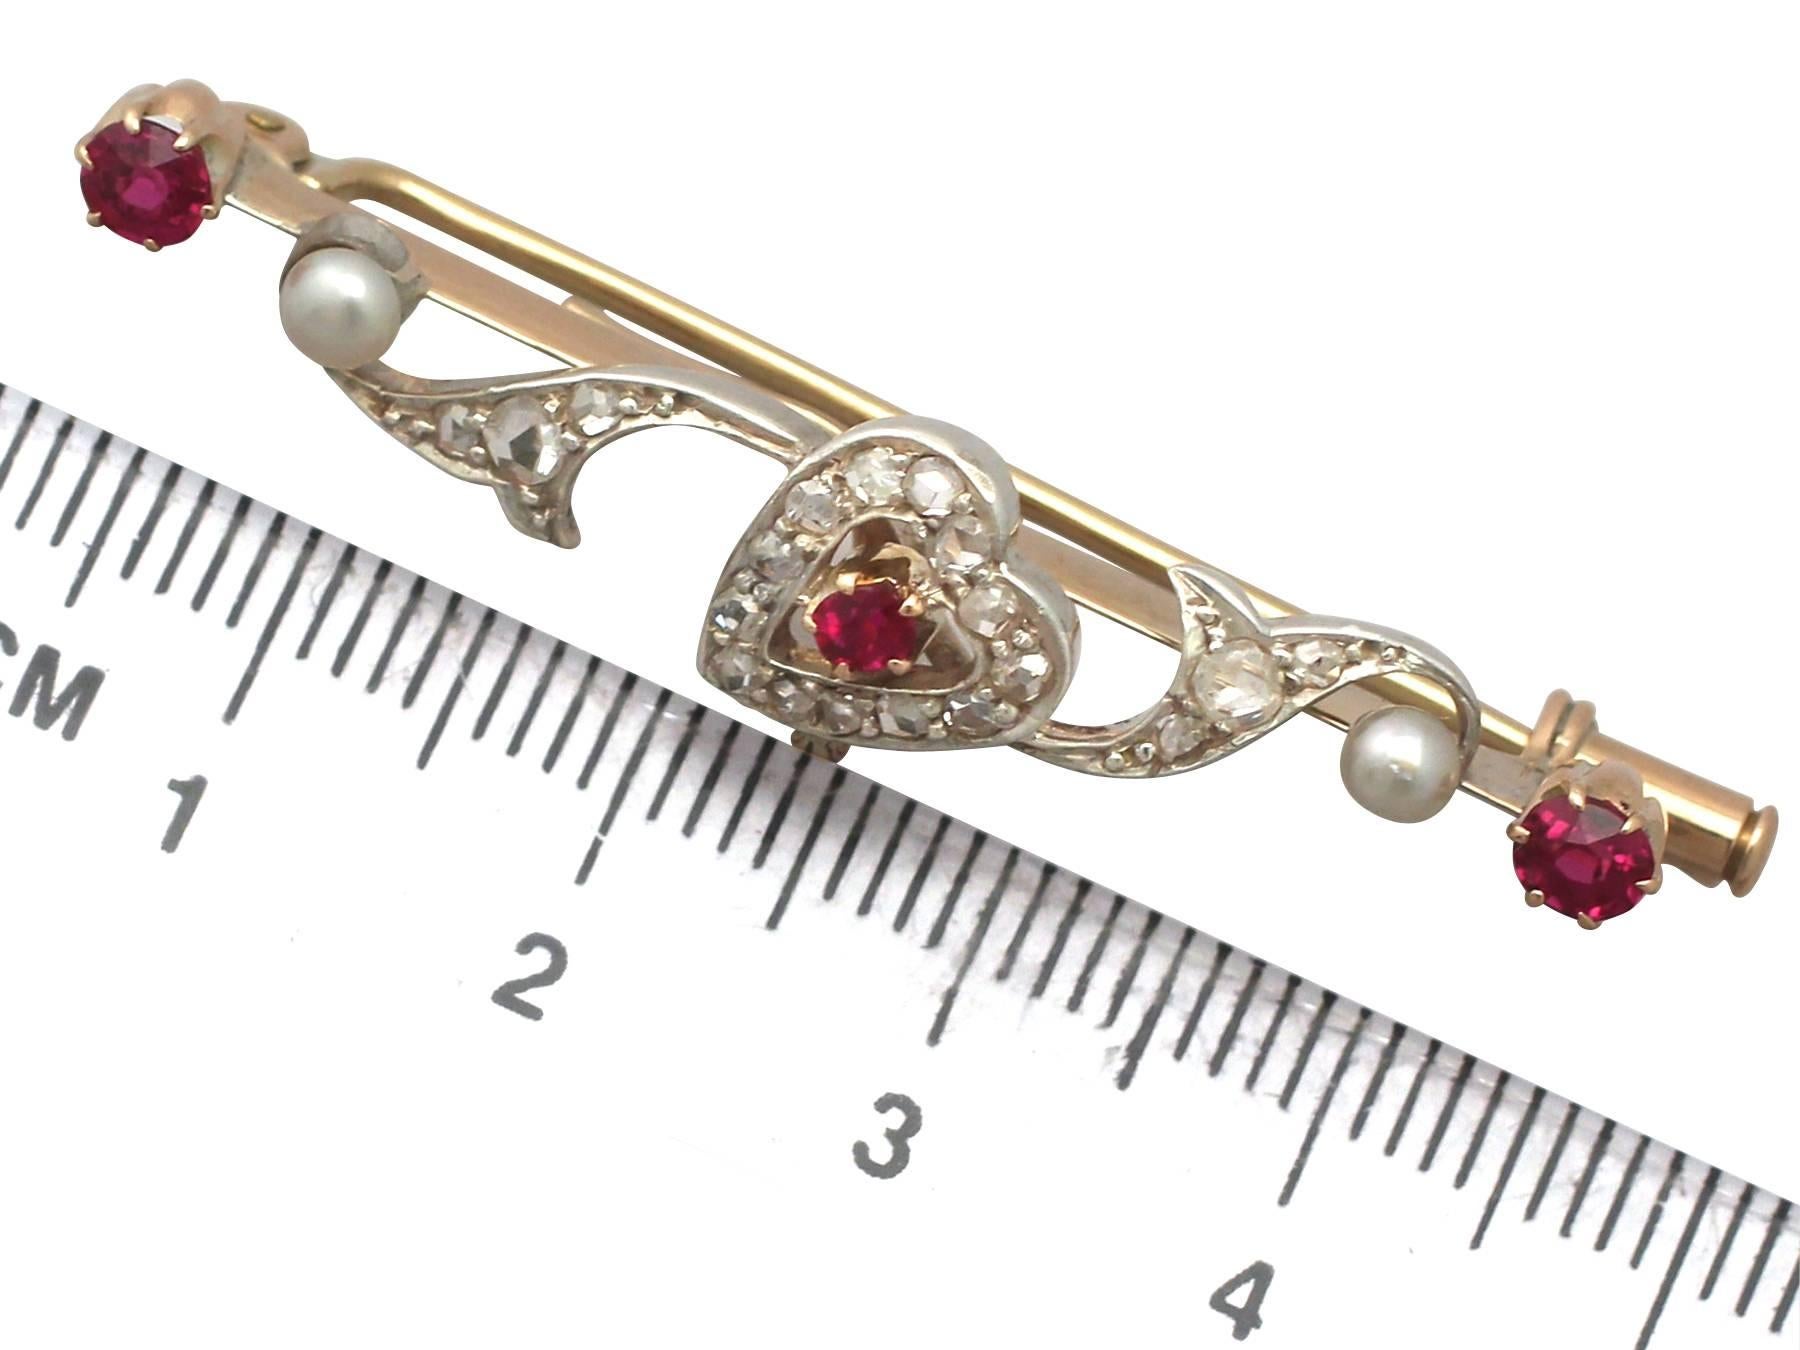 0.52Ct Ruby & 0.29Ct Diamond, Pearl & 14k Yellow Gold Brooch - Antique Victorian 3